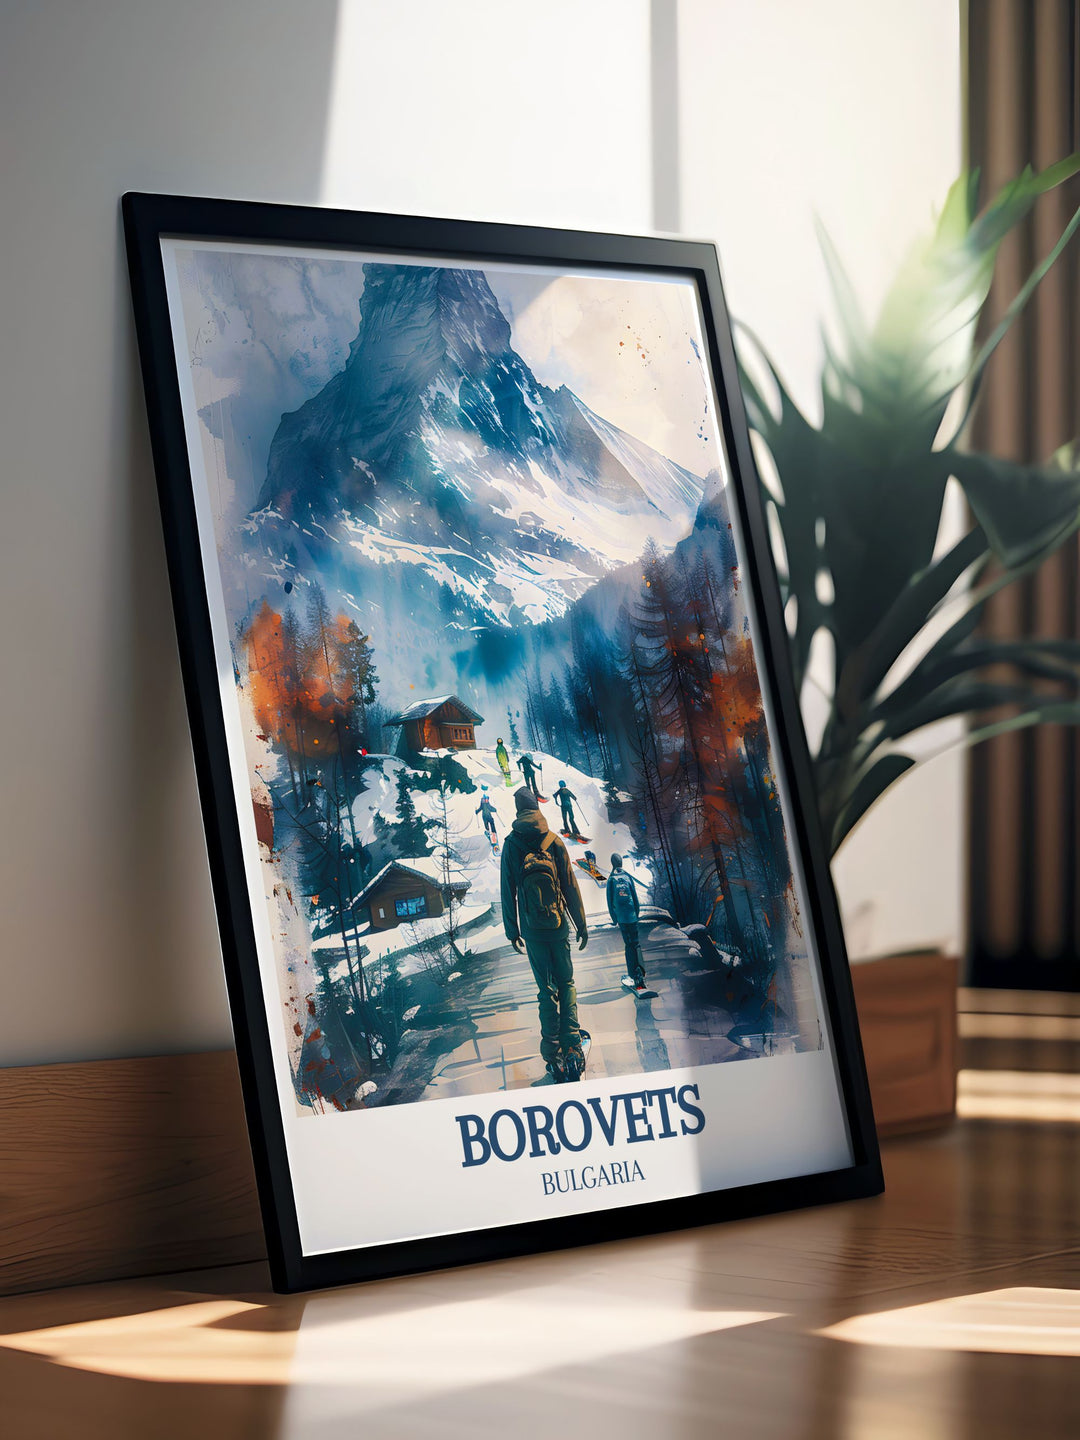 High quality print of Borovets modern ski amenities and the rugged terrain of the Musala Pathway, capturing the essence of Bulgarias premier alpine destination. Ideal for art lovers who appreciate both adventure and nature.